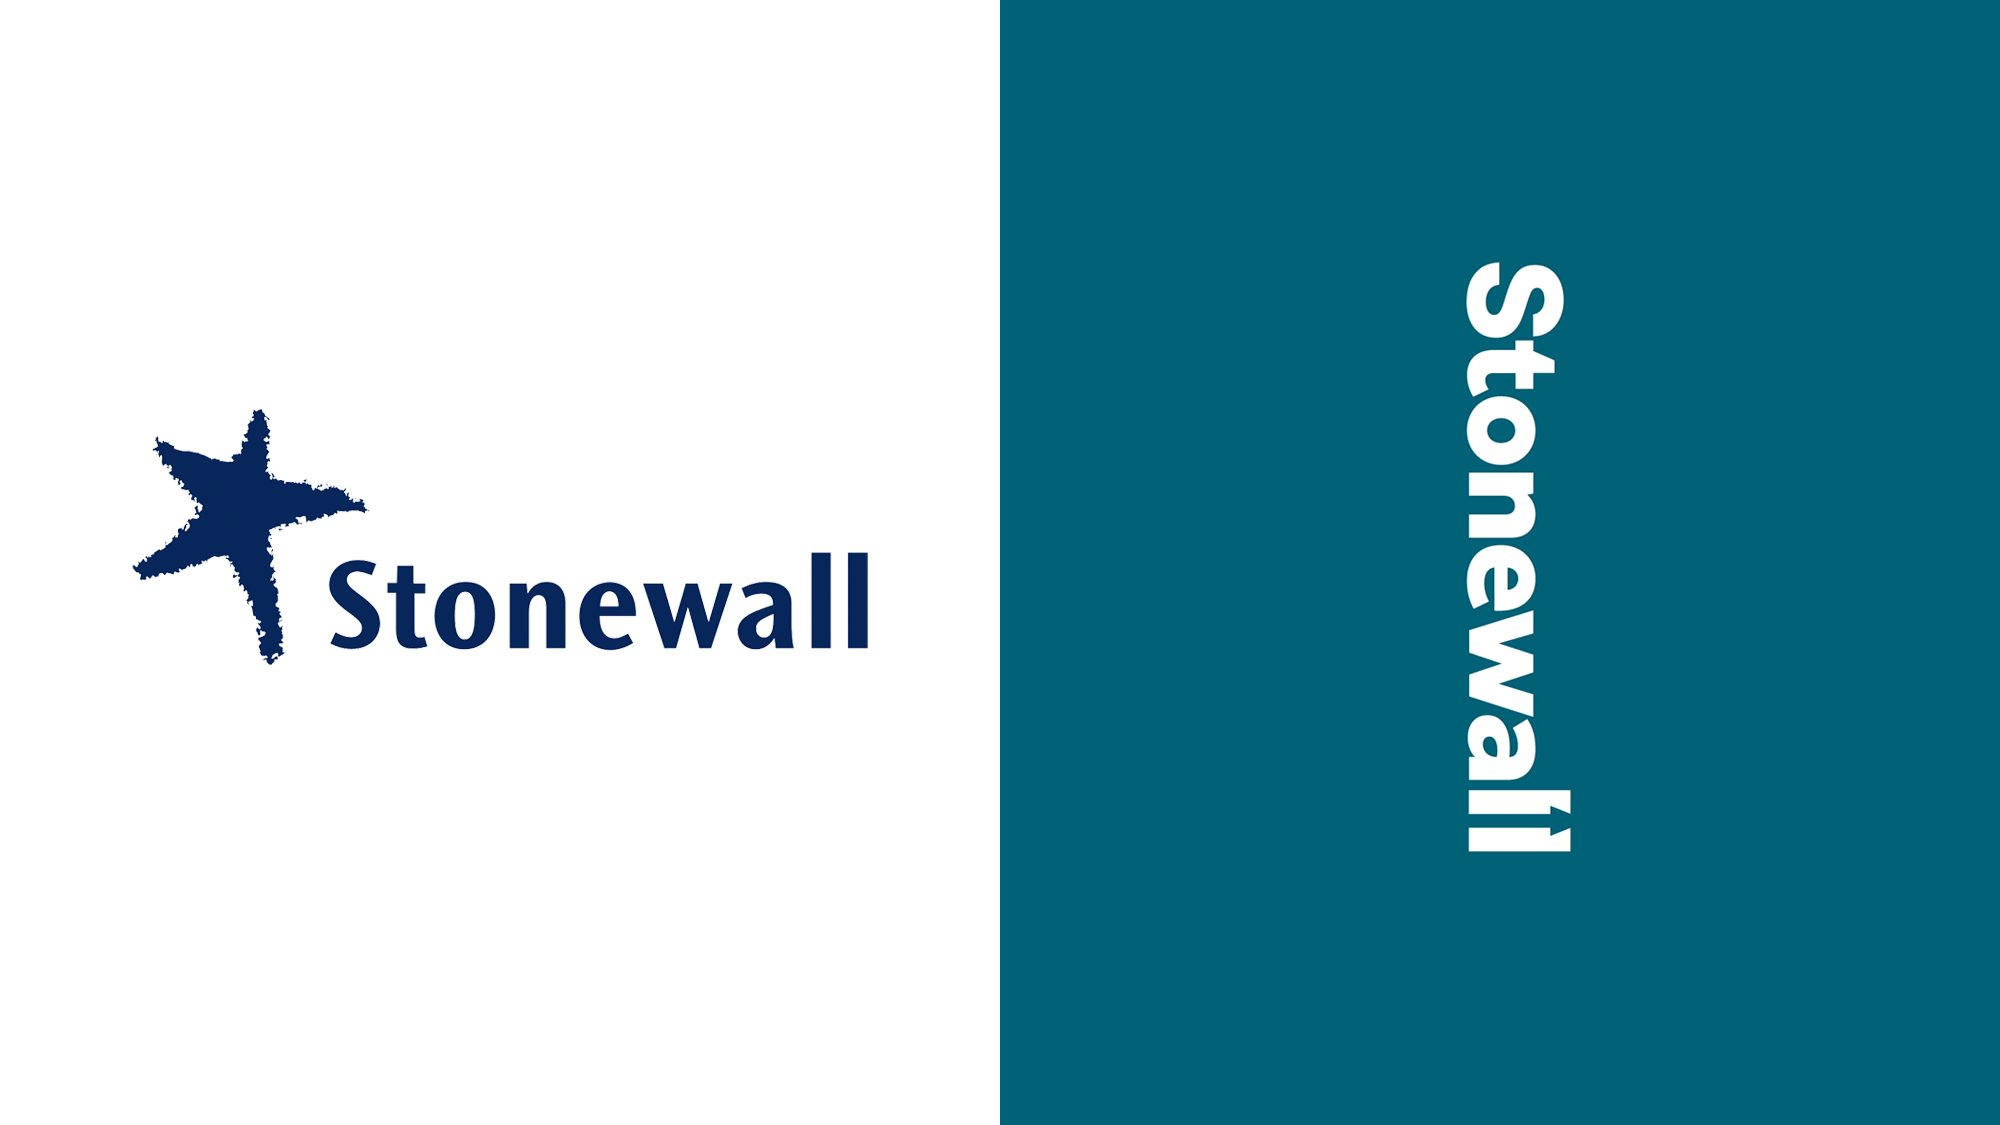 Brand New: New Logo and Identity for Stonewall by Jones Knowles Ritchie